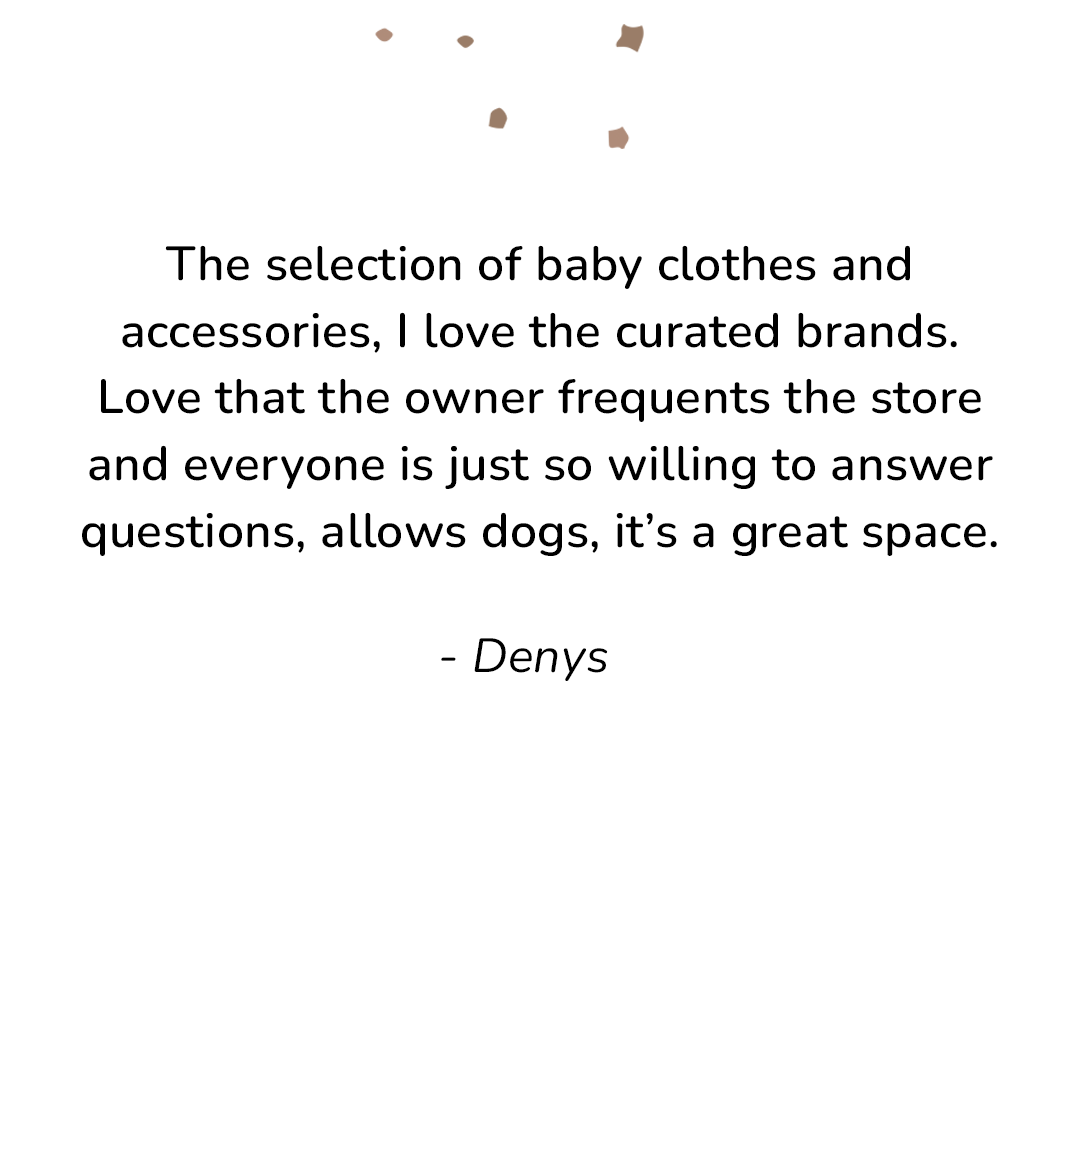 Customer Review: "The selection of baby clothes & accessories, I love the curated brands. Love that the owner frequents the store and everyone is just so willing to answer questiosn, allows dogs, it's a great space." - Denys